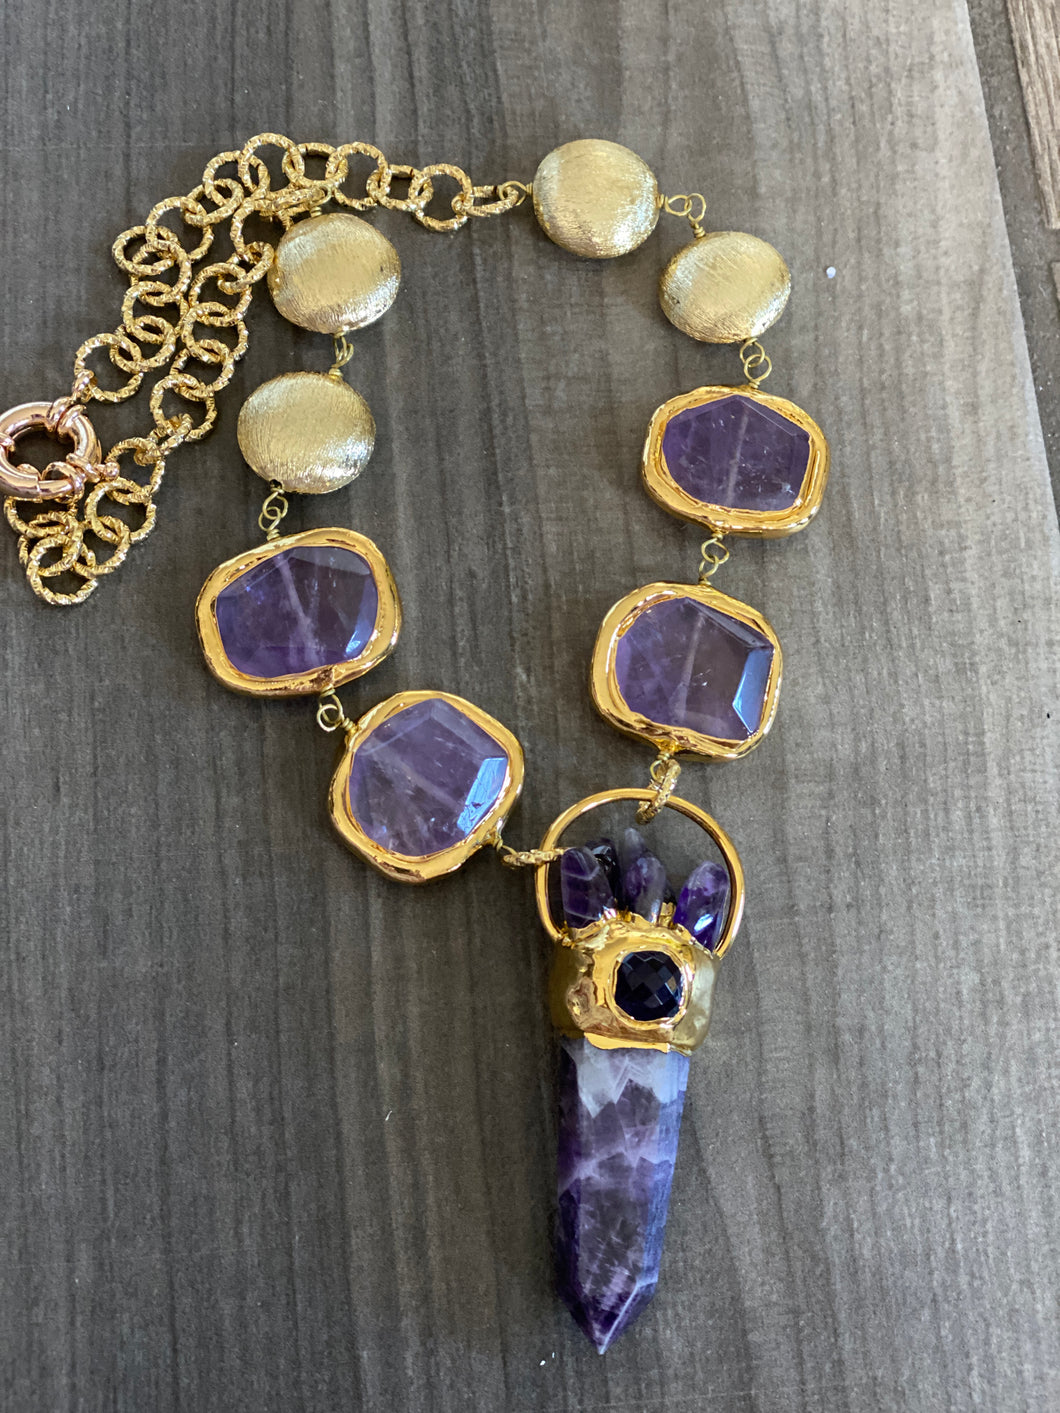 The Amethyst Hope Necklace